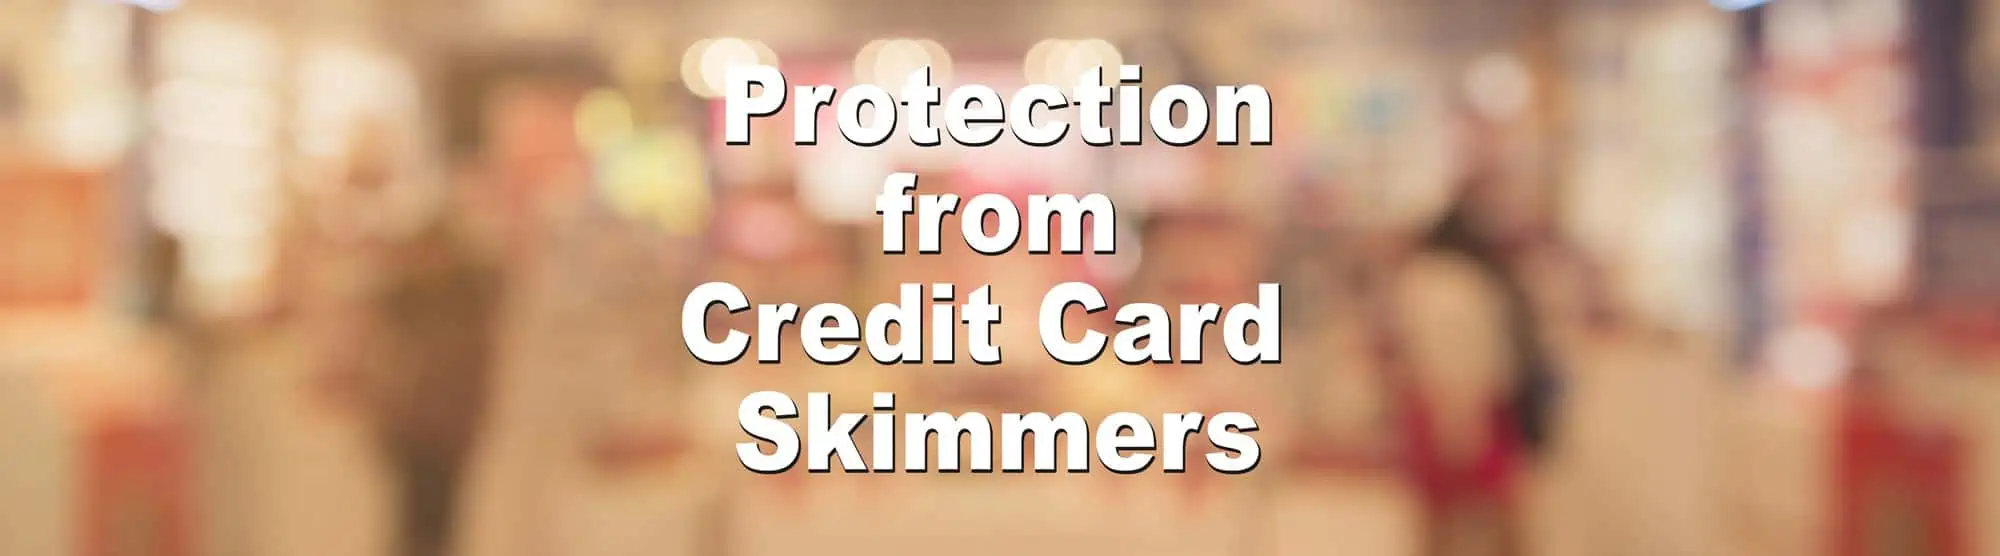 Protection from Credit Card Skimmers